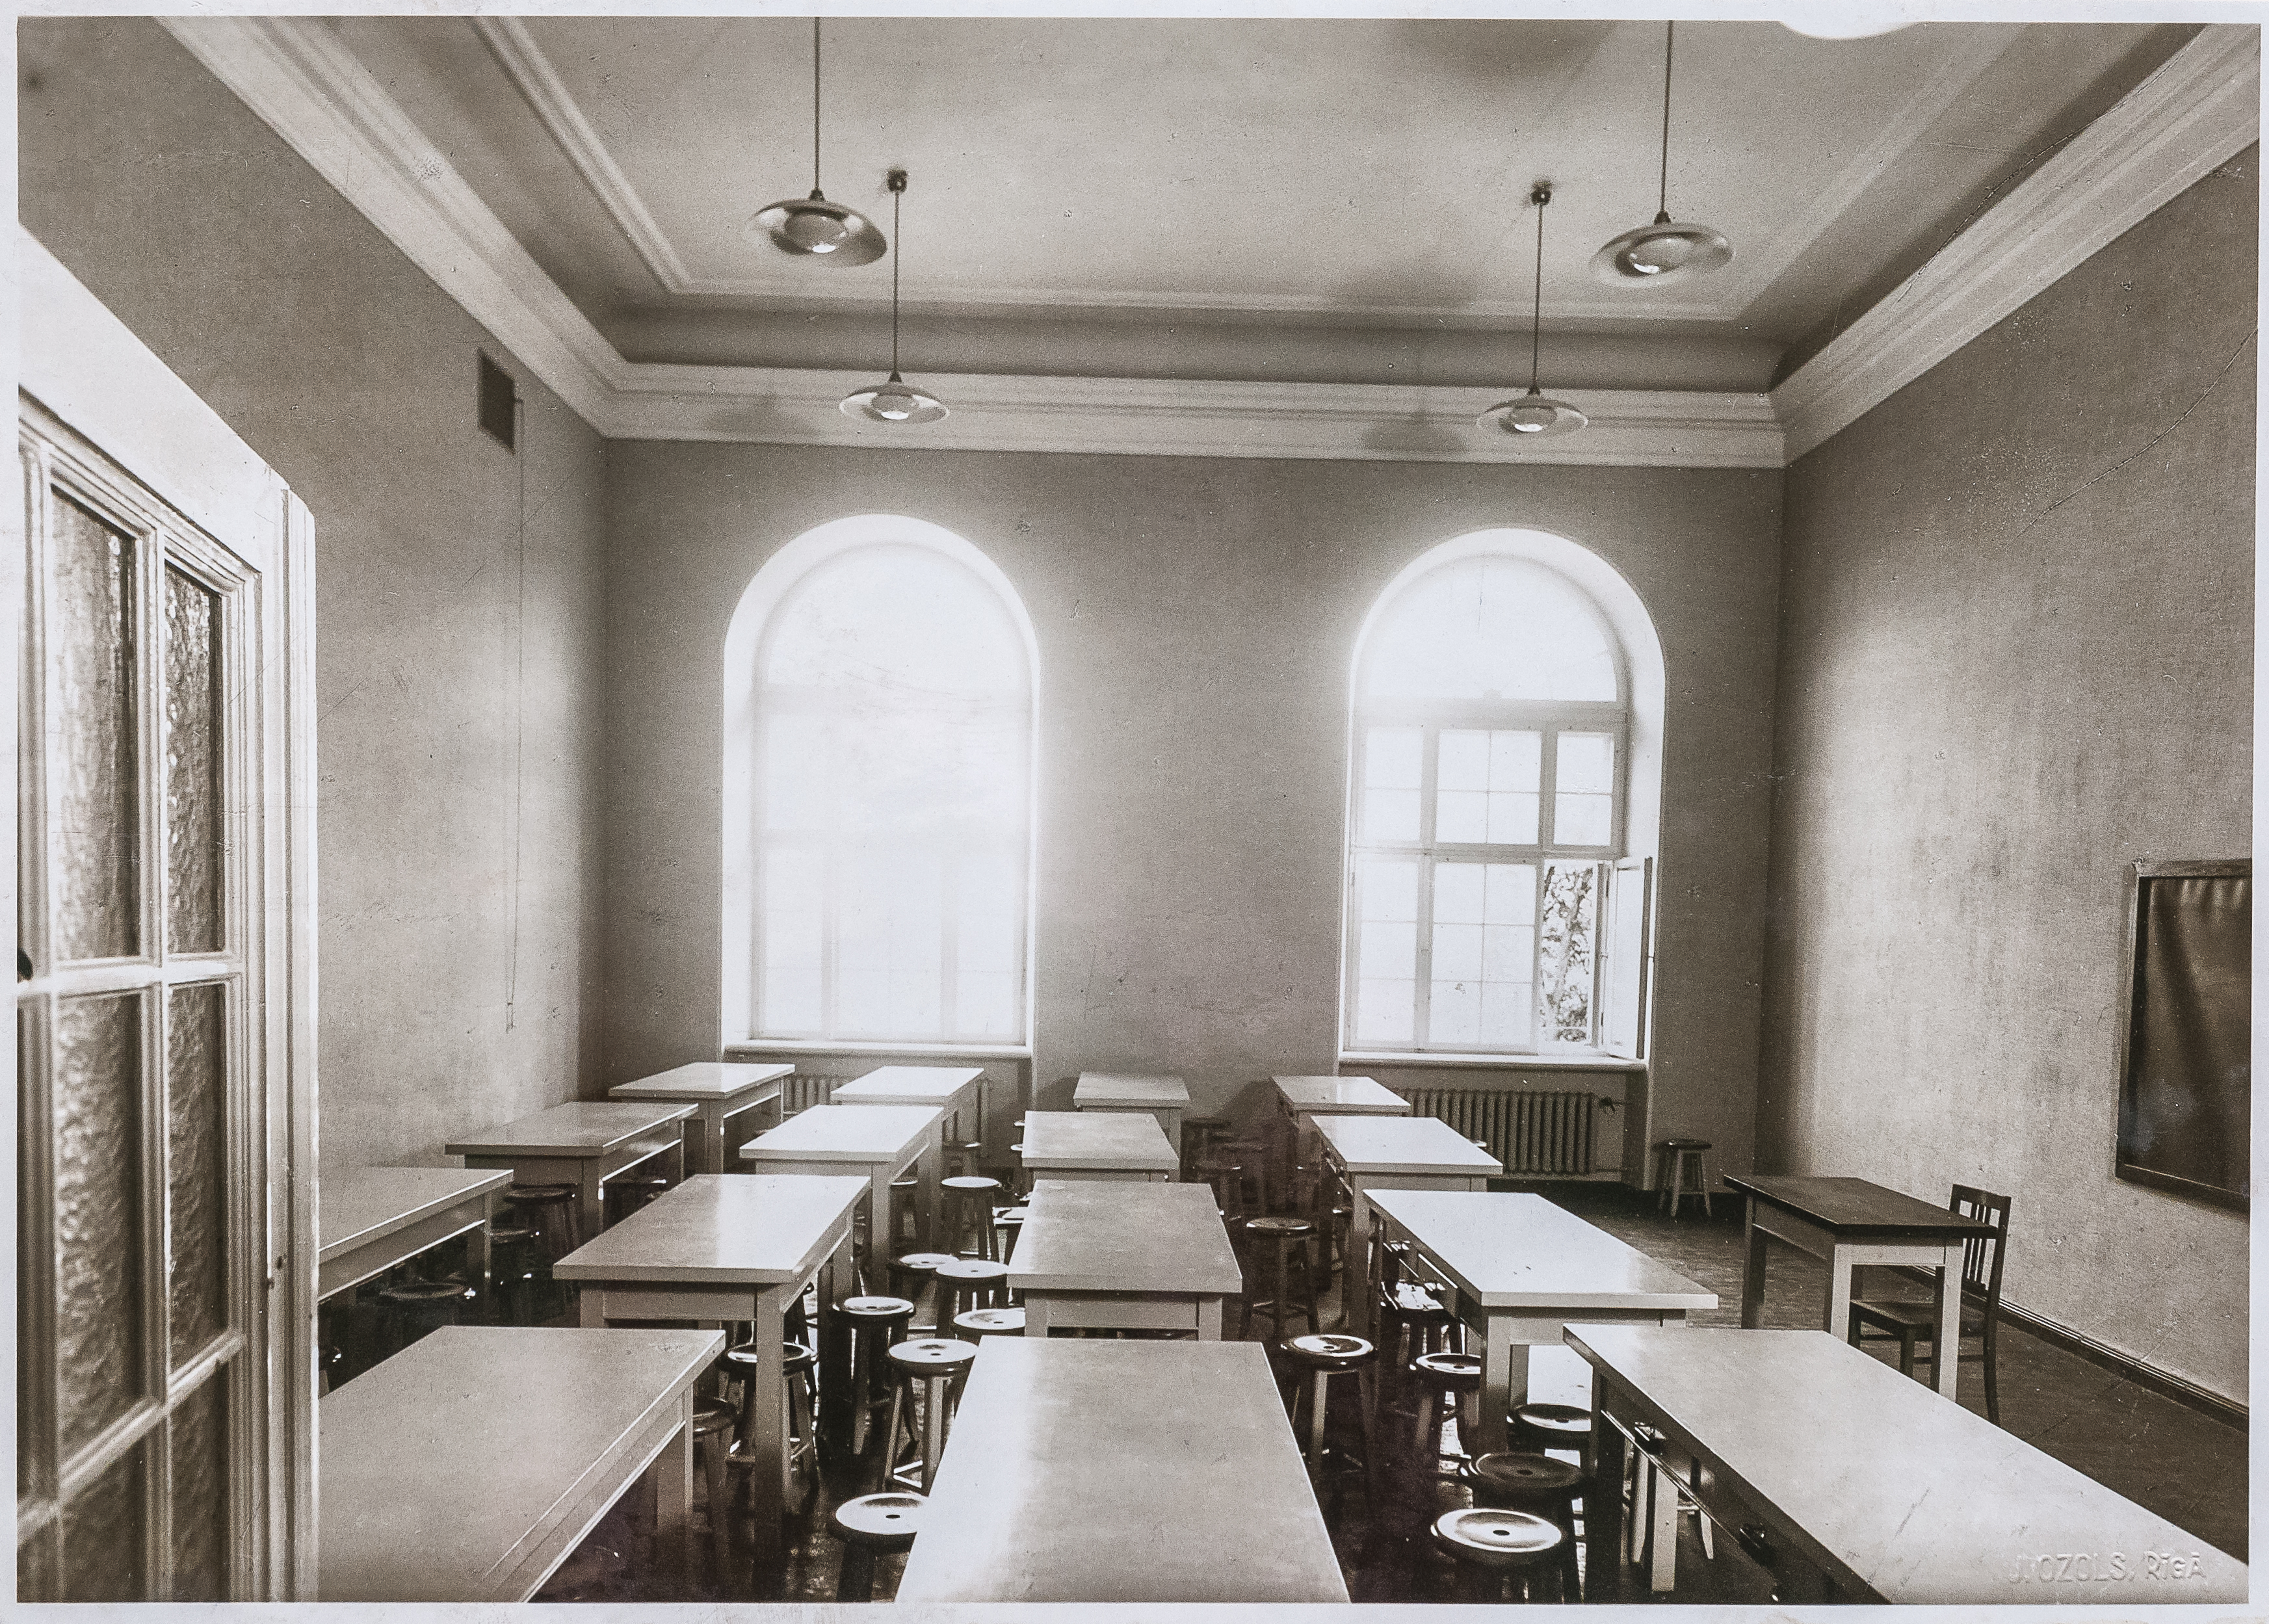 <p><strong>THE LECTURE ROOM ON THE 2nd FLOOR</strong></p>  <p>&nbsp;</p>  <p class="text-align-justify">The lecture room of the Jelgava Academy of Agriculture. Nowadays it is used by students and teachers of the Faculty of Economics and Social Development.</p>  <p>&nbsp;</p>  <p><em>Photo: 1939</em></p>